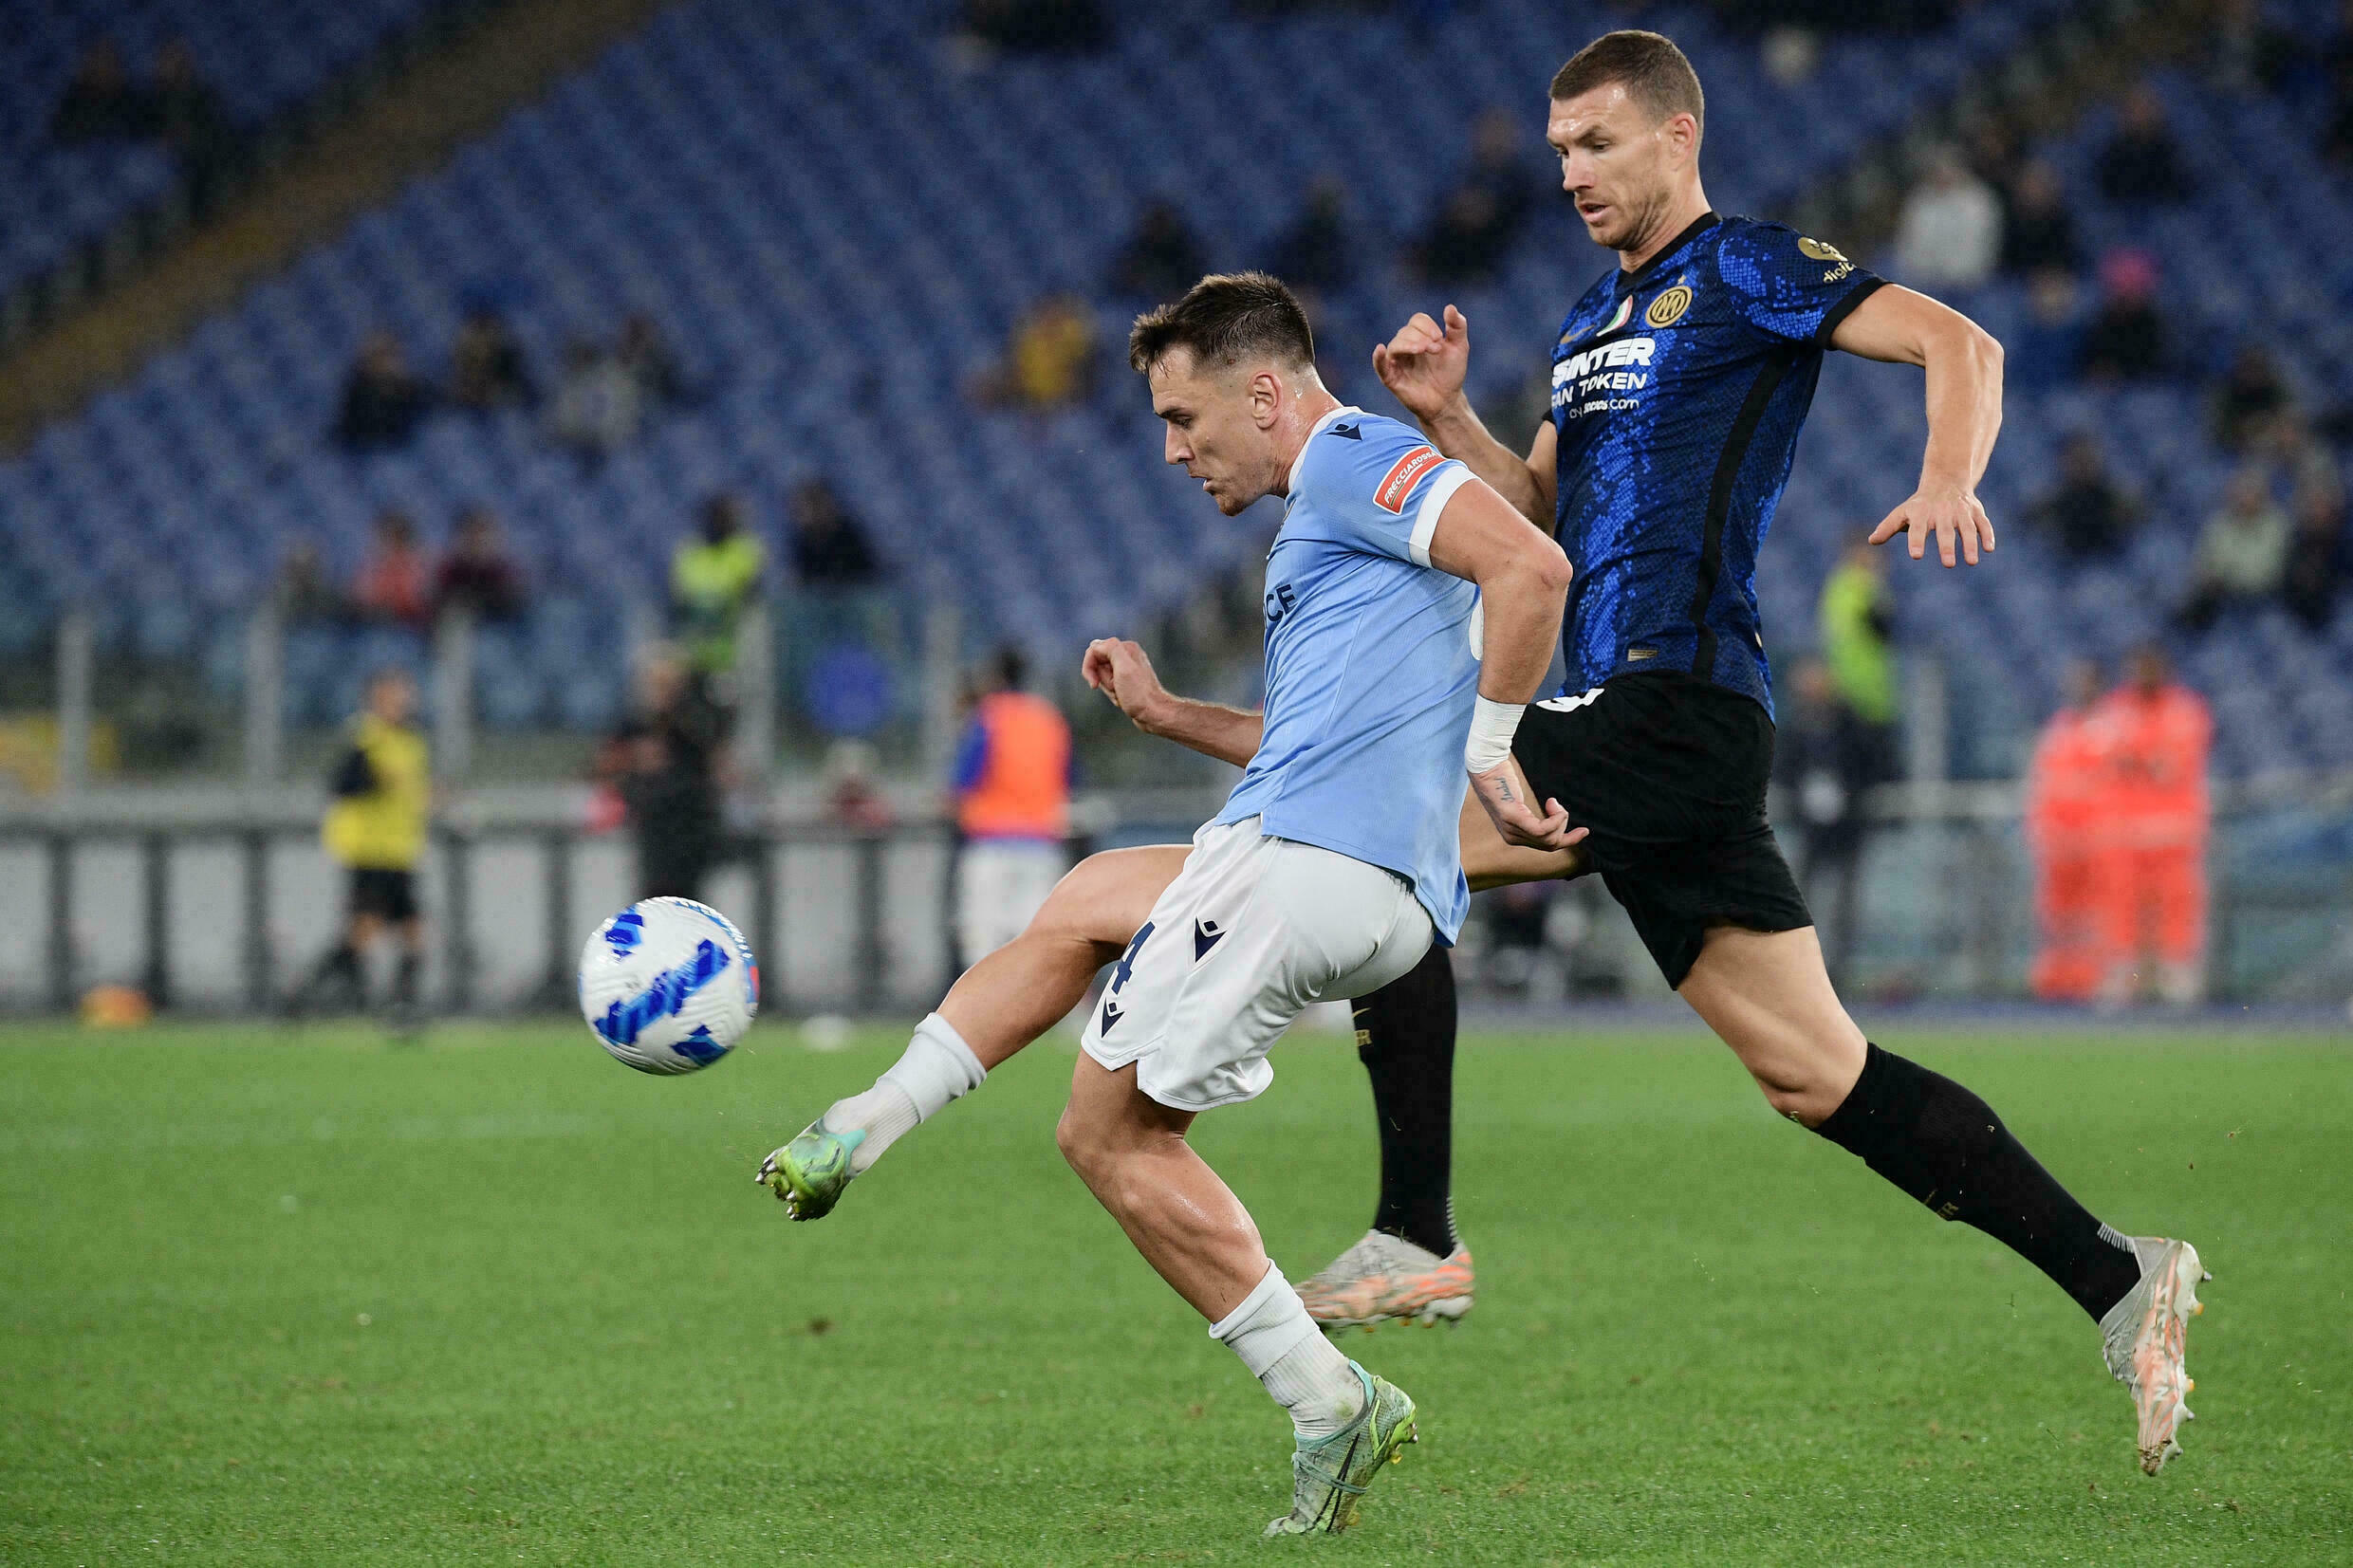 Spain's Lazio defender Patrick (c) controls the ball in front of Inter's Bosnian striker Edin Diego (R.) during the Serie A match between Lazio Rome and Inter Milan at the Olympic Stadium in Rome on October 16, 2021.